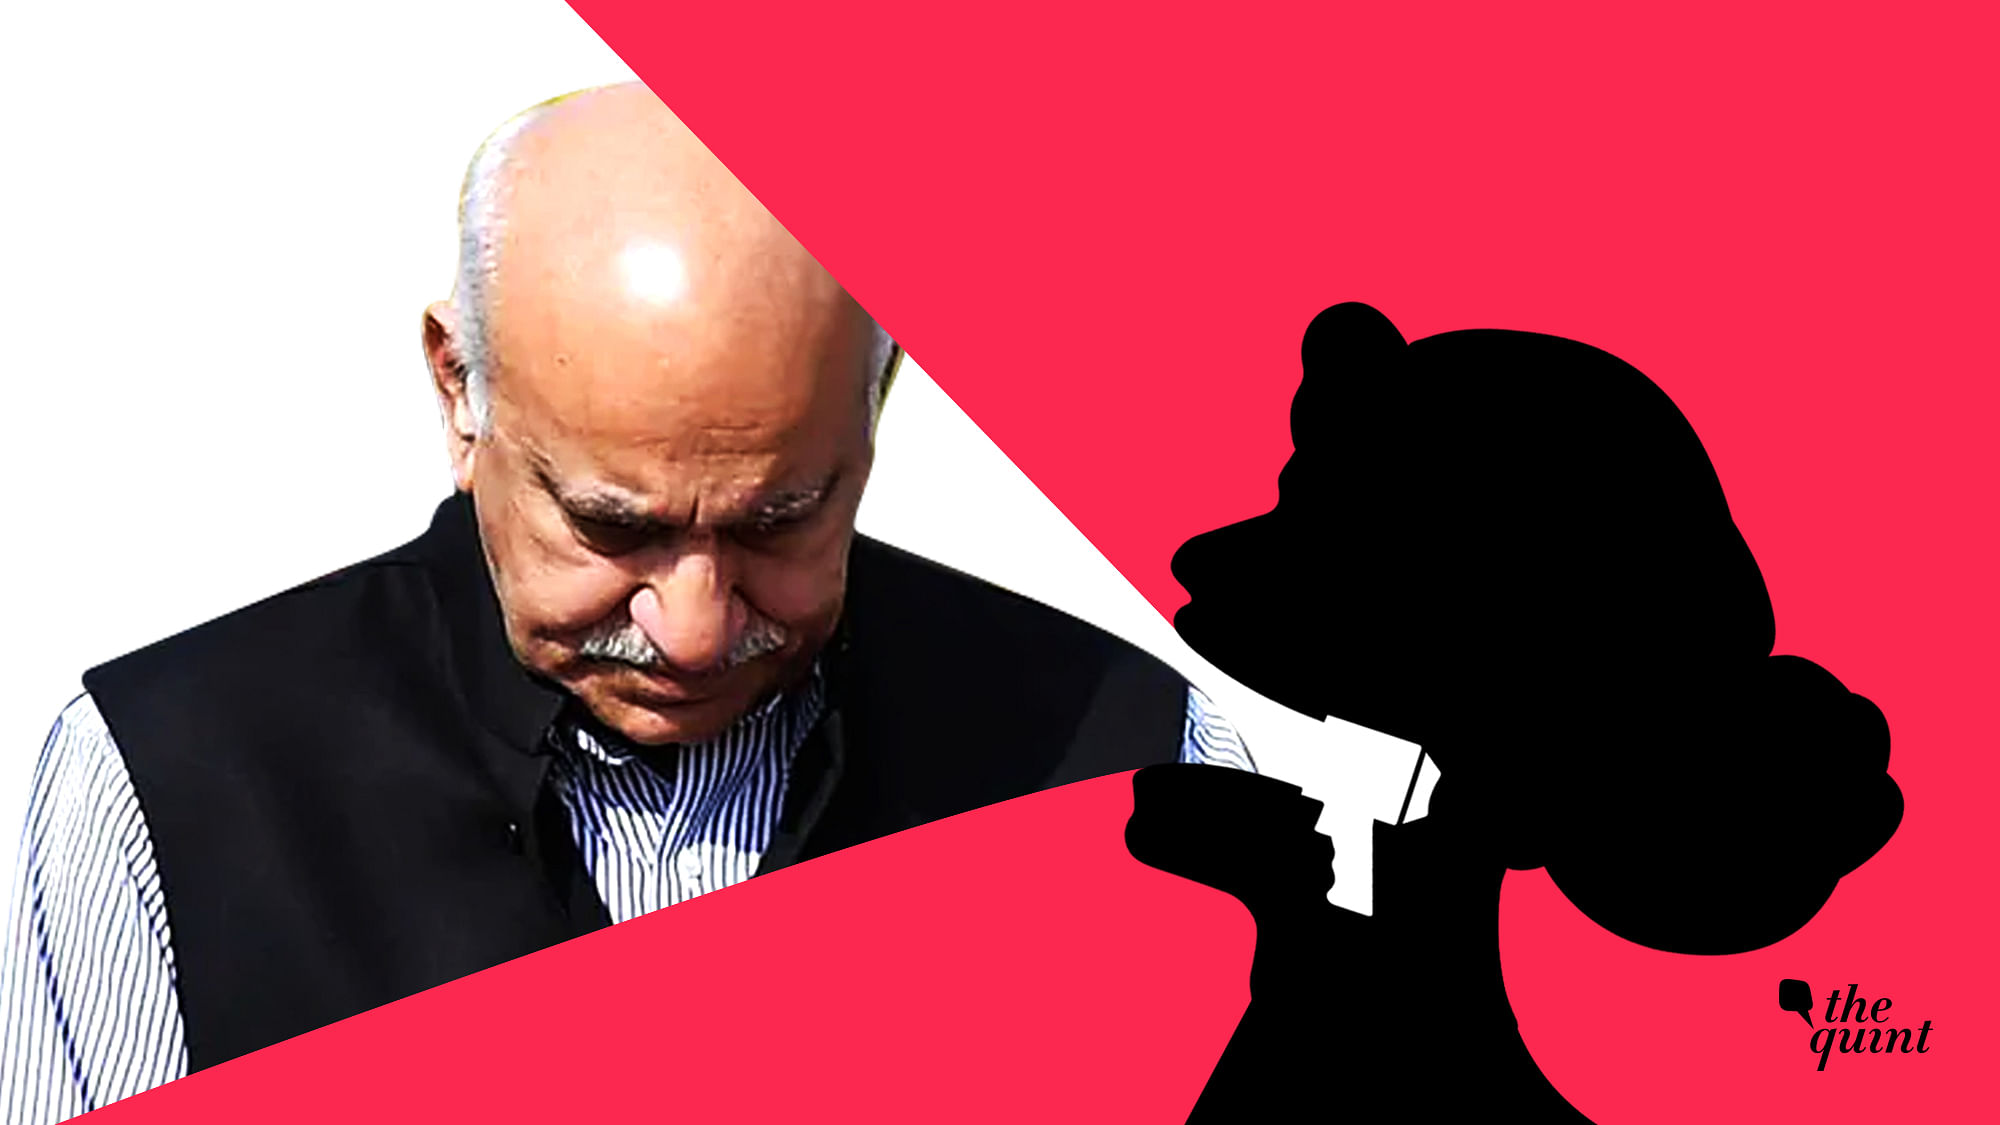 Former Union Minister MJ Akbar stepped down from his post after multiple journalists accused him of sexual assault. &nbsp;